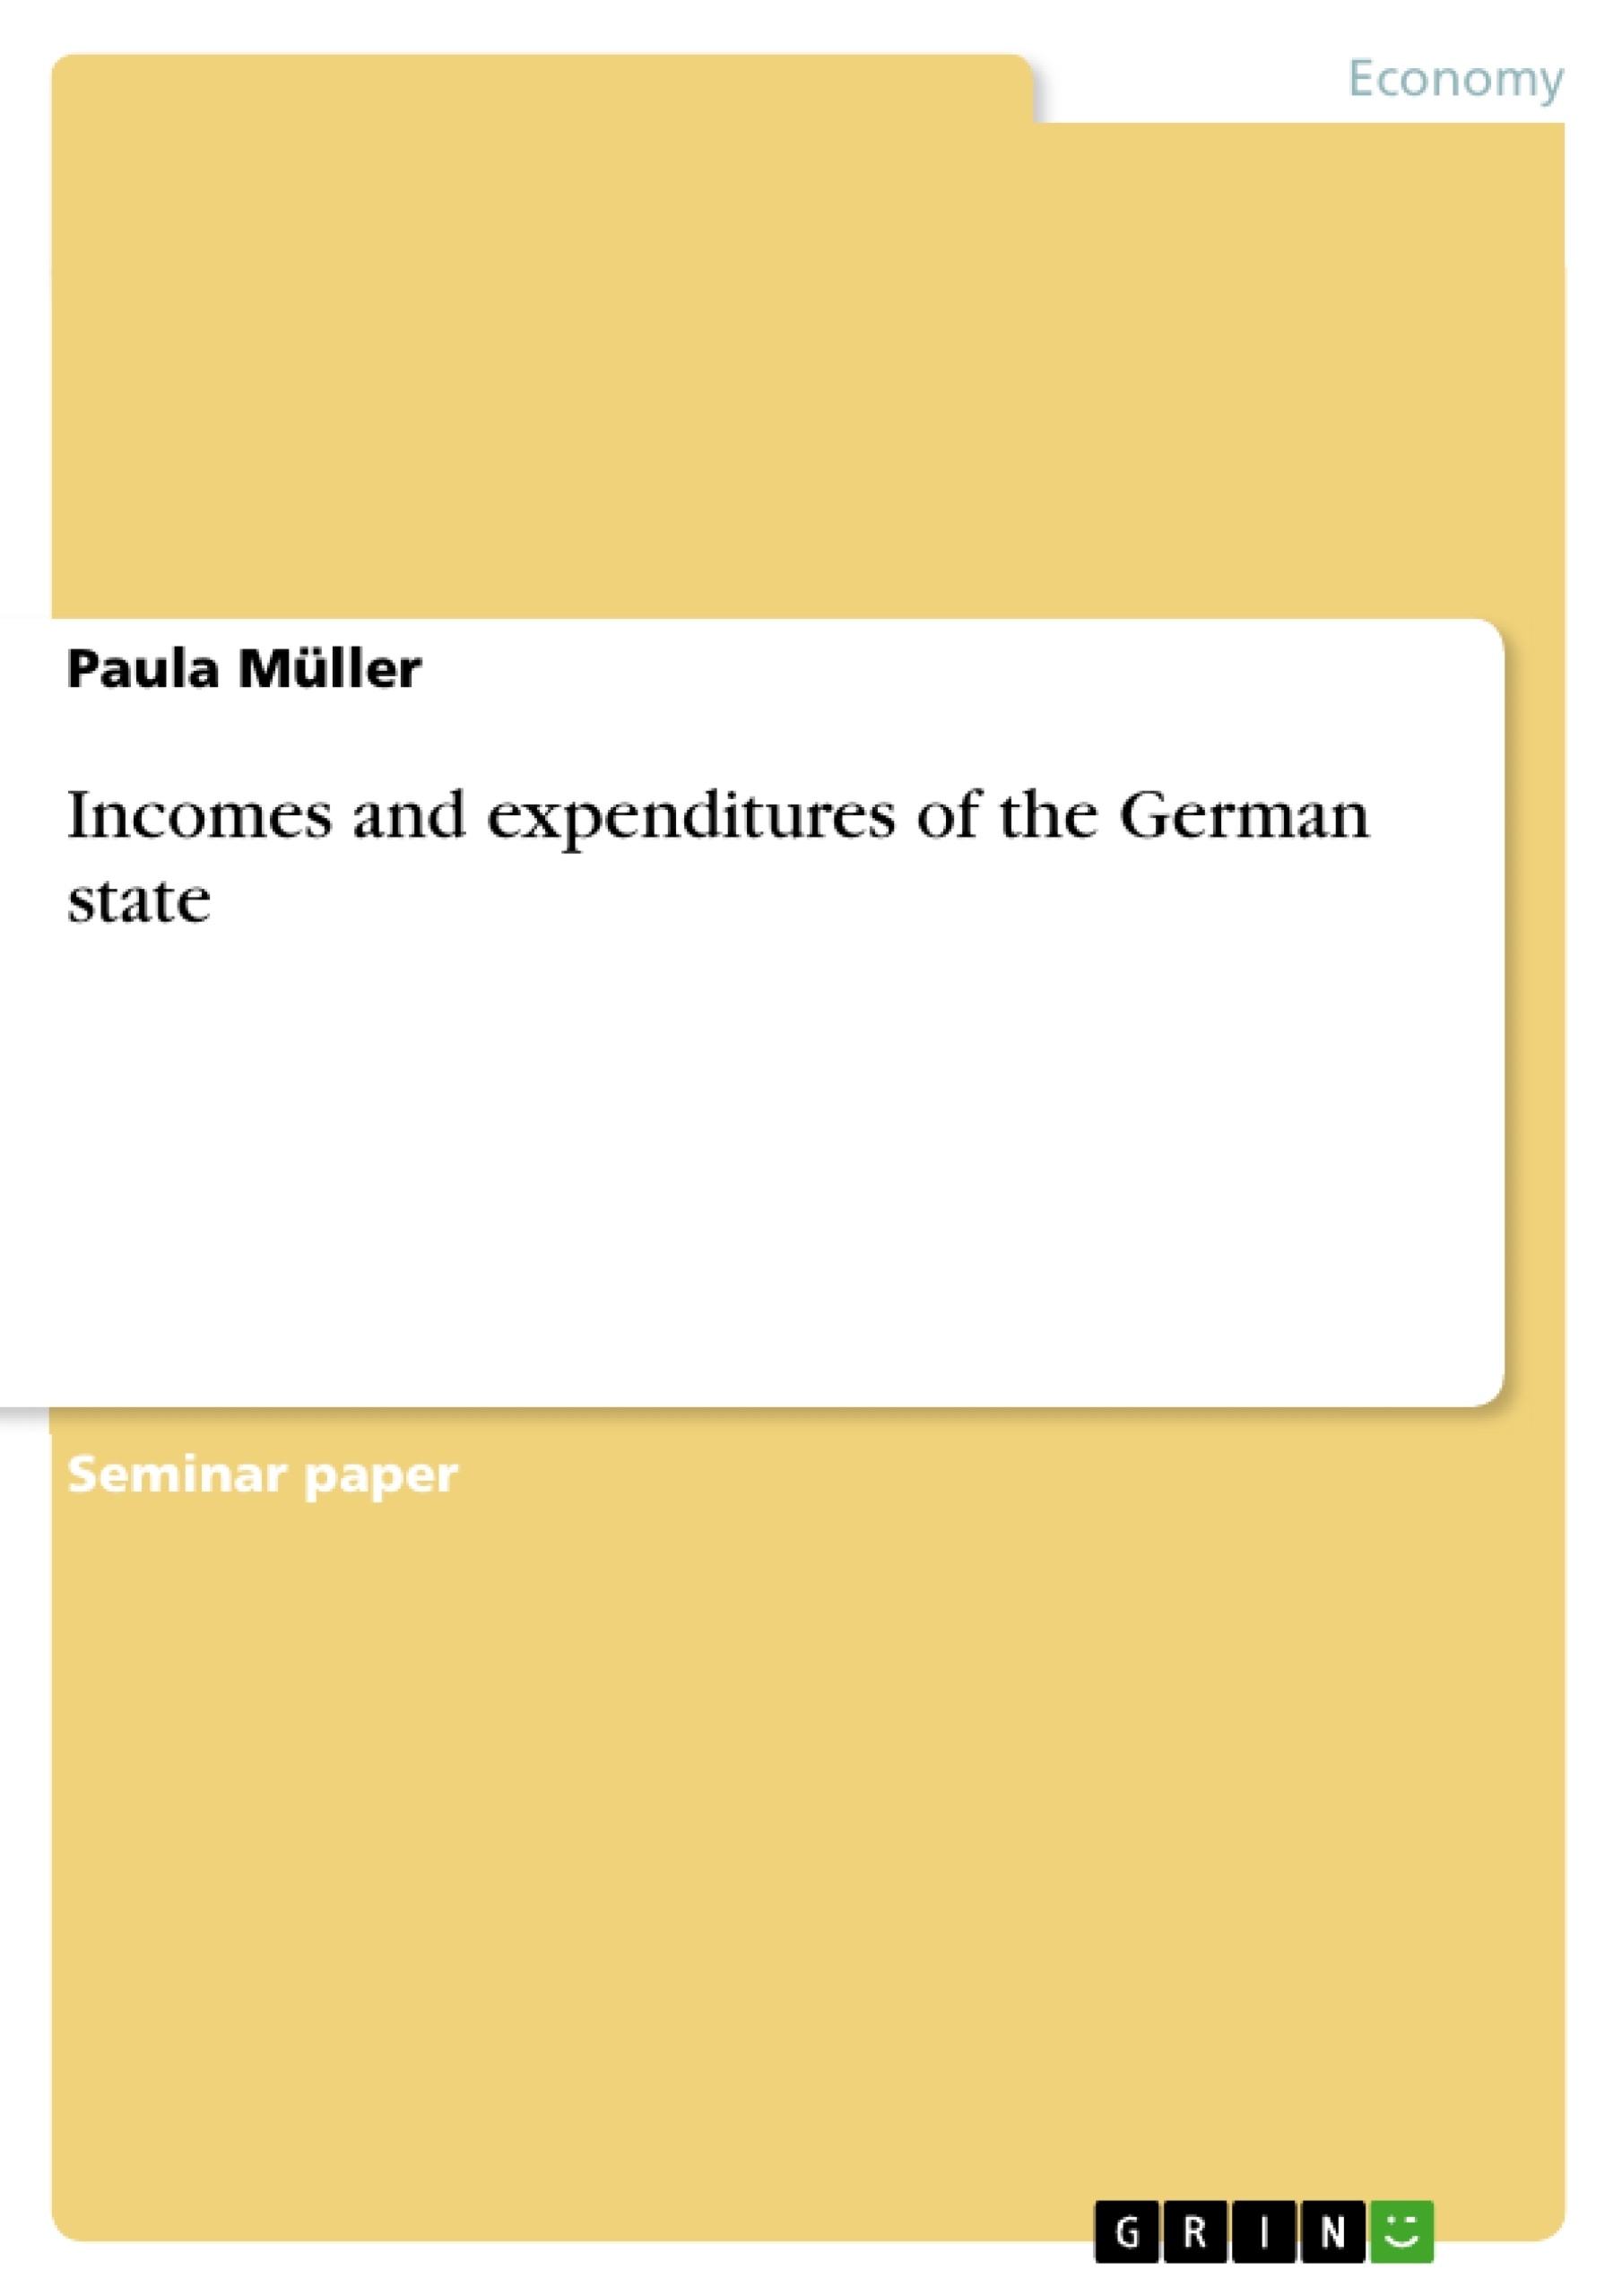 Título: Incomes and expenditures of the German state